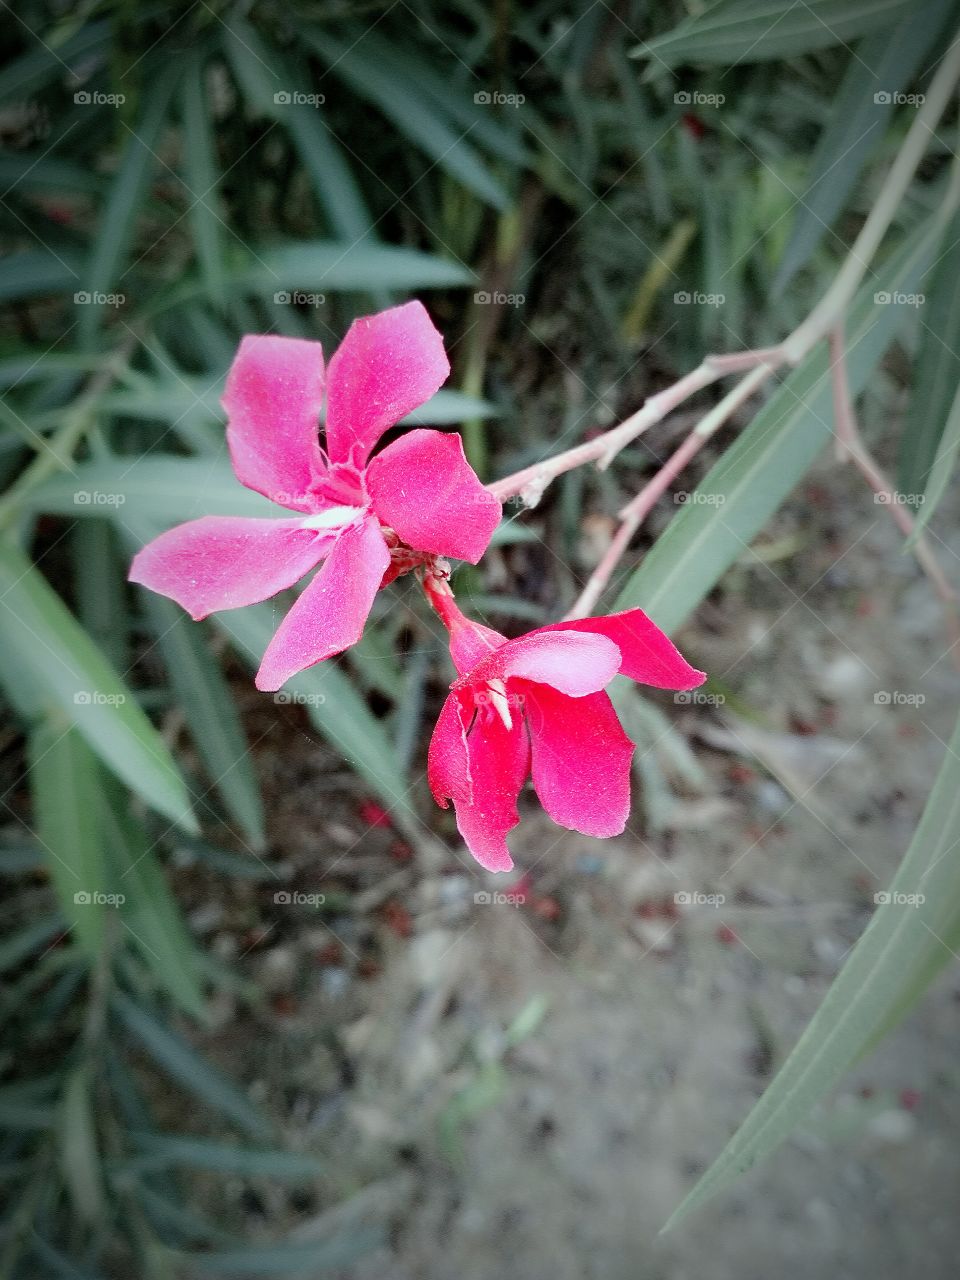 shyness of a flower from othe